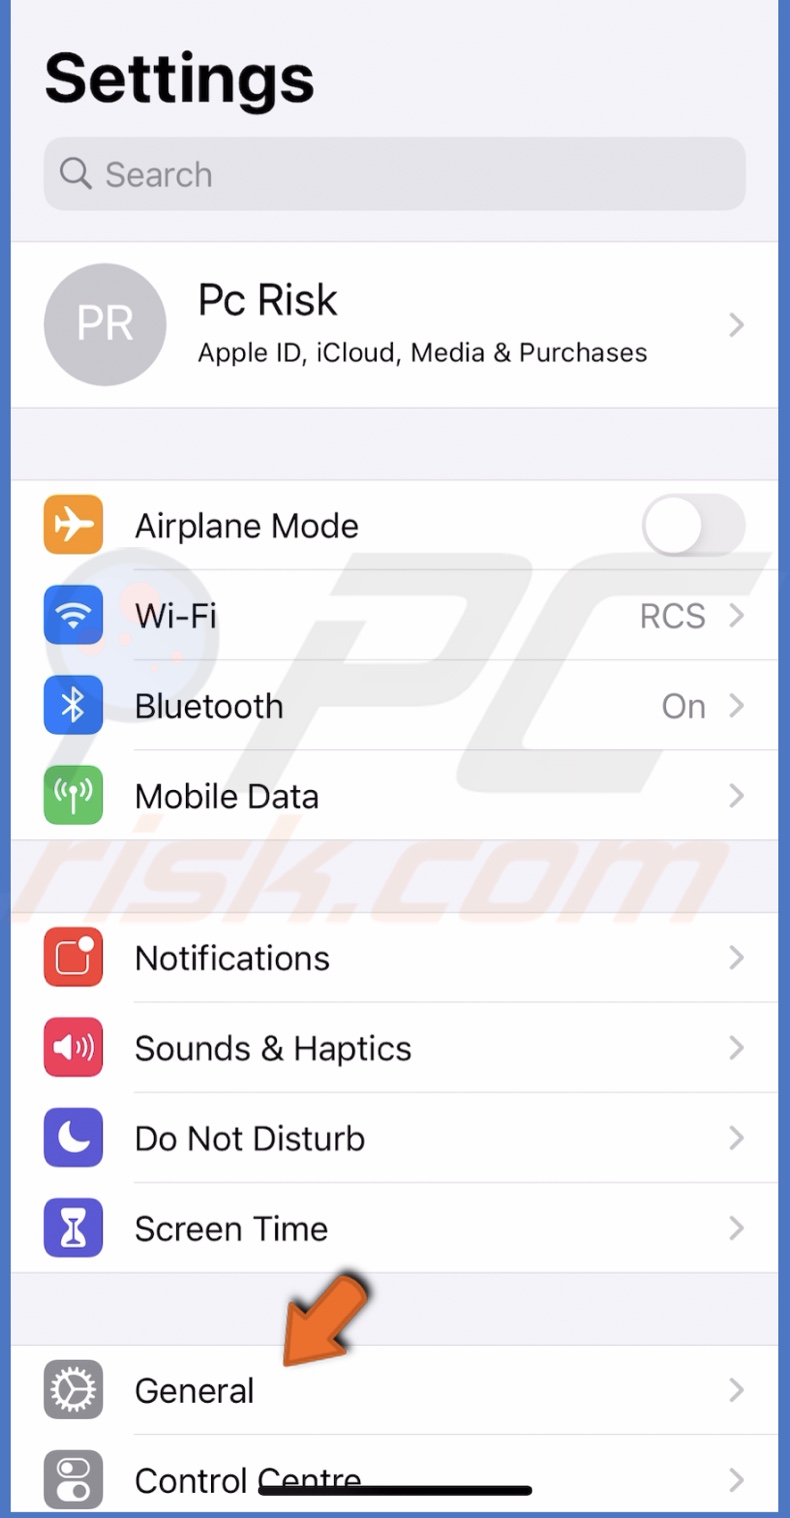 Go to General settings